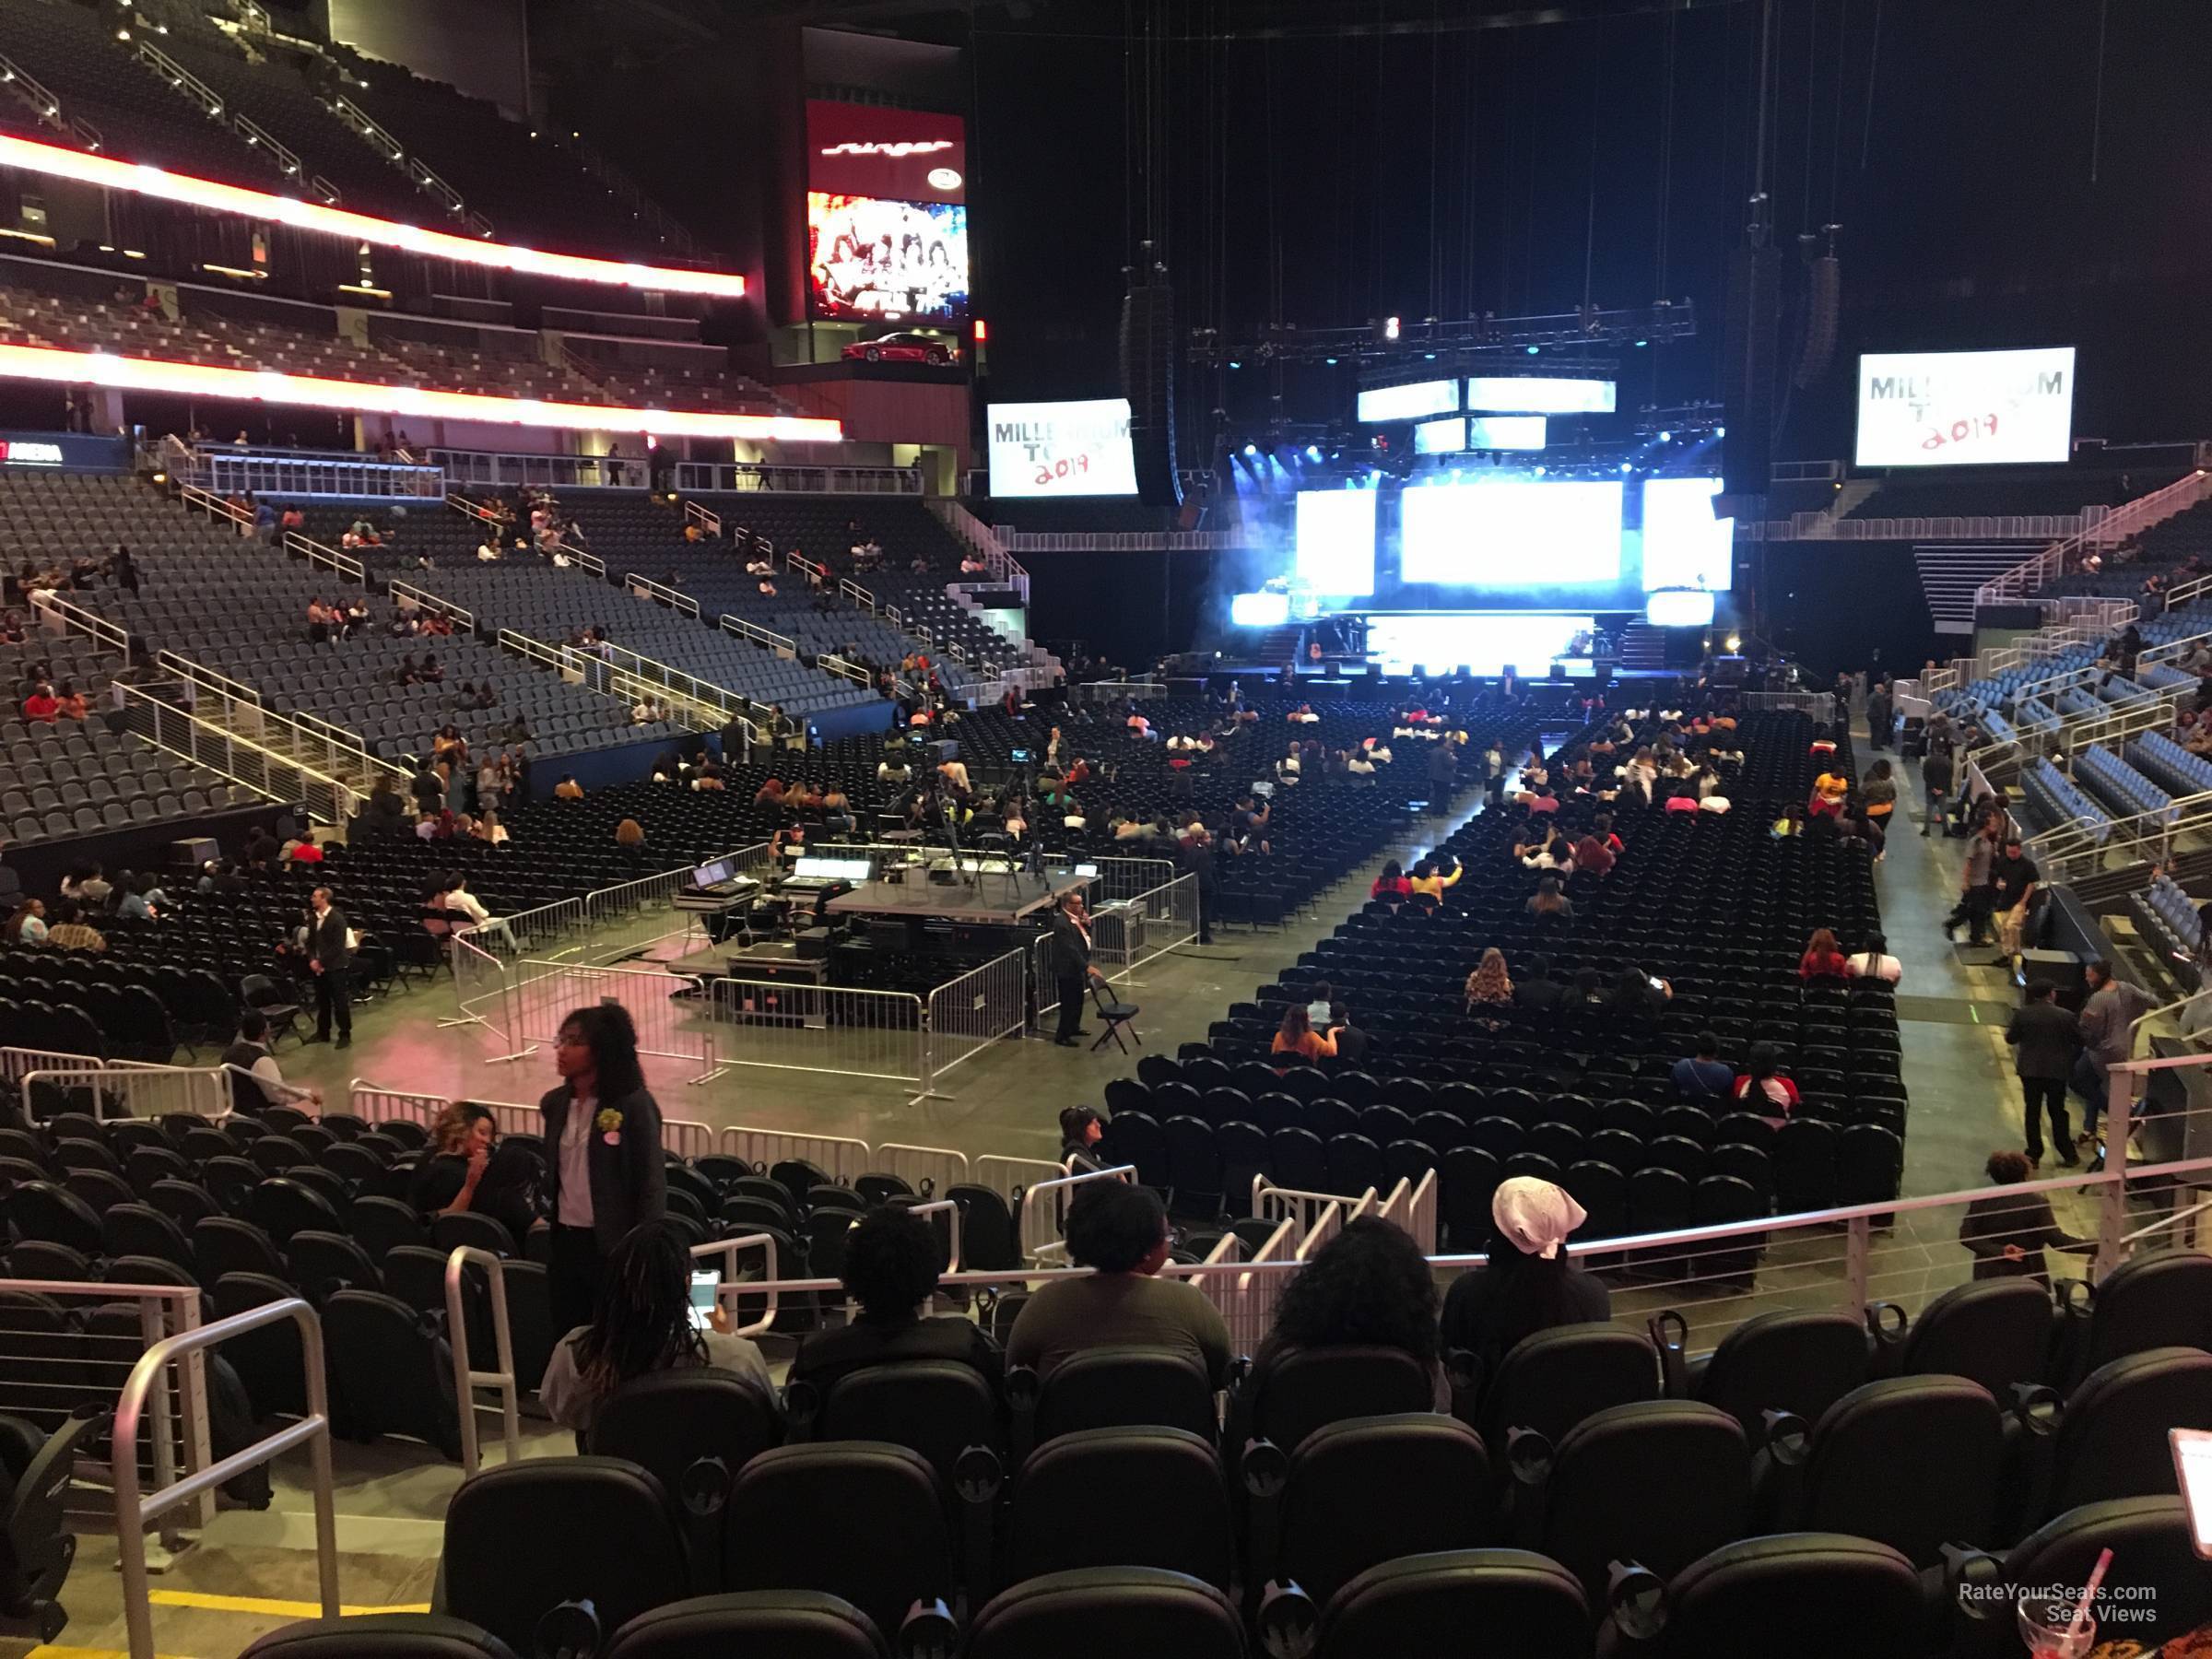 Section 112 at State Farm Arena - RateYourSeats.com